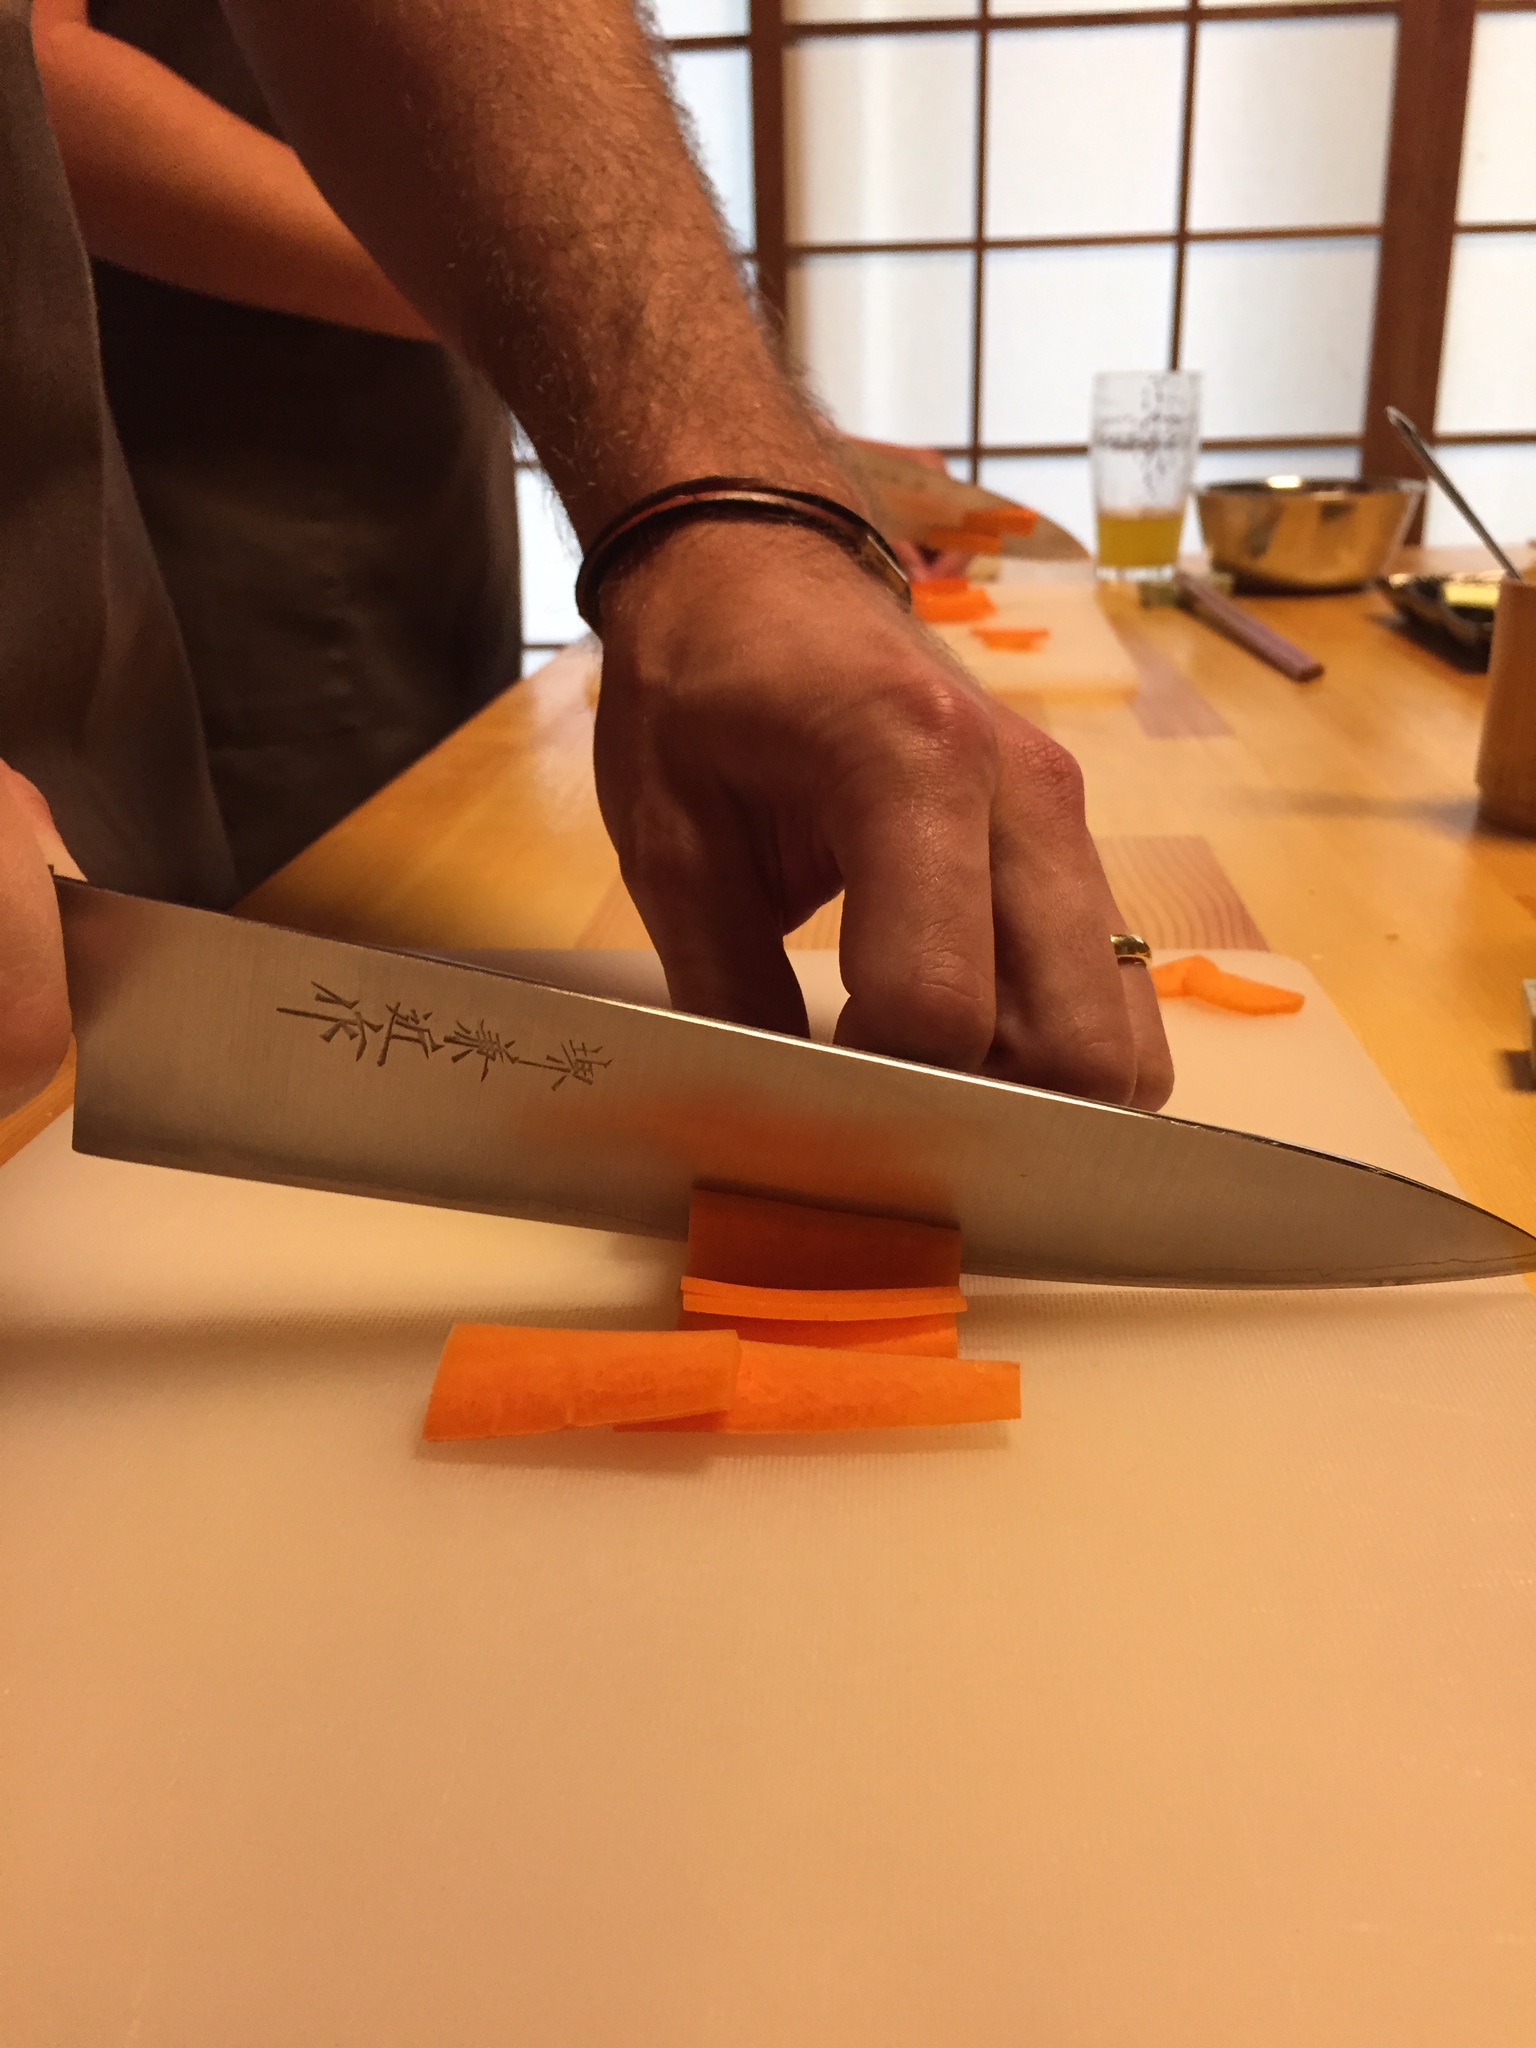 Cole chops carrots at our Osaka Eats cooking class